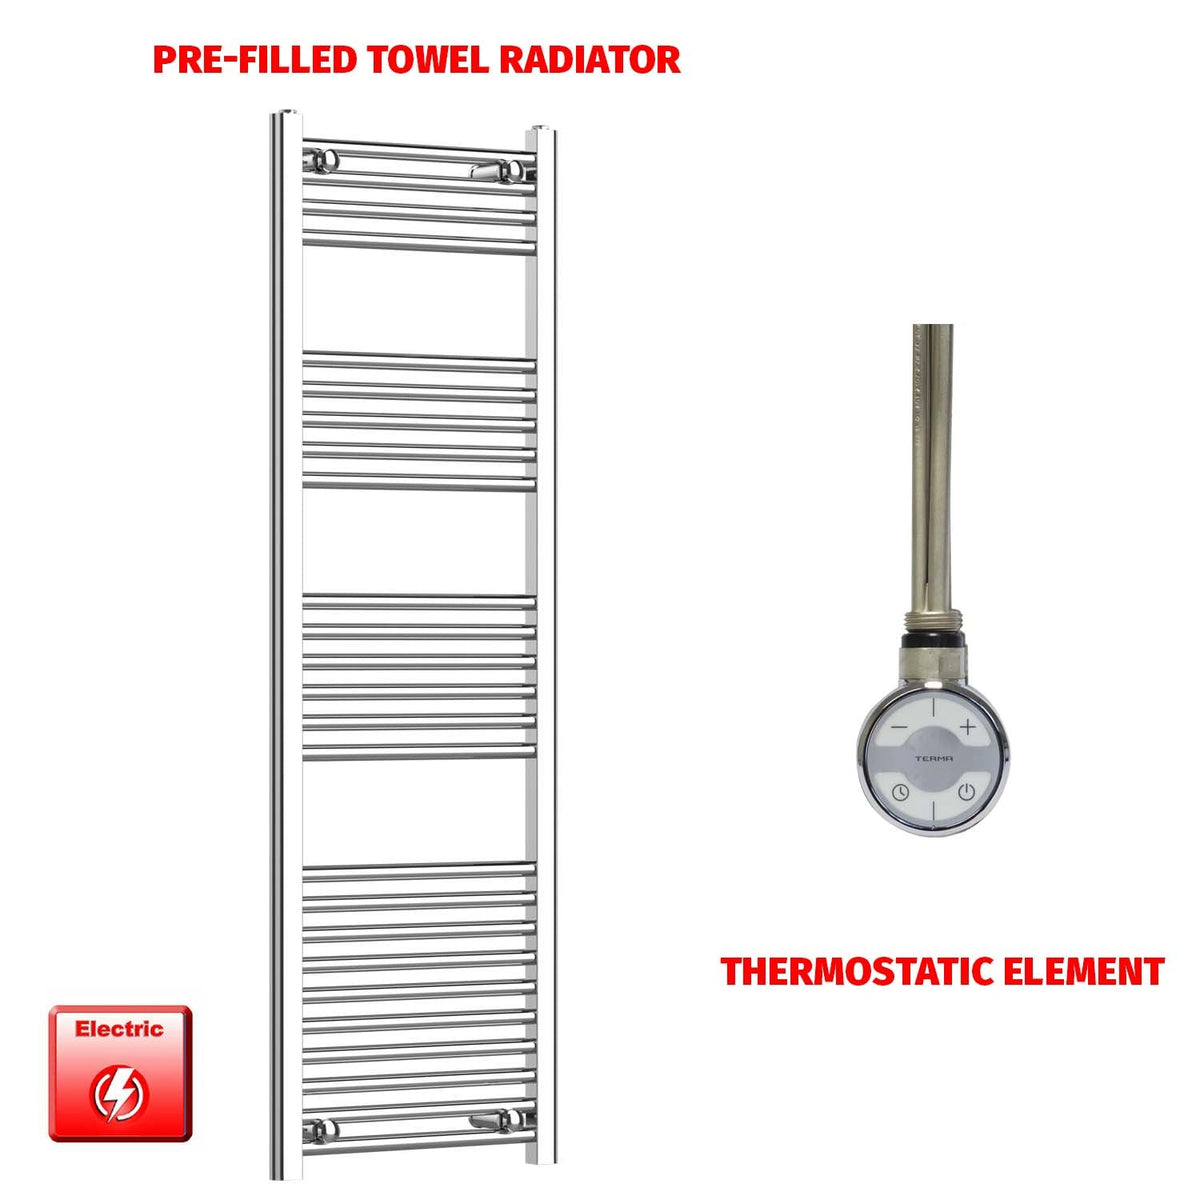 1400mm High 450mm Wide Pre-Filled Electric Heated Towel Radiator Straight Chrome MOA Thermostatic element no timer